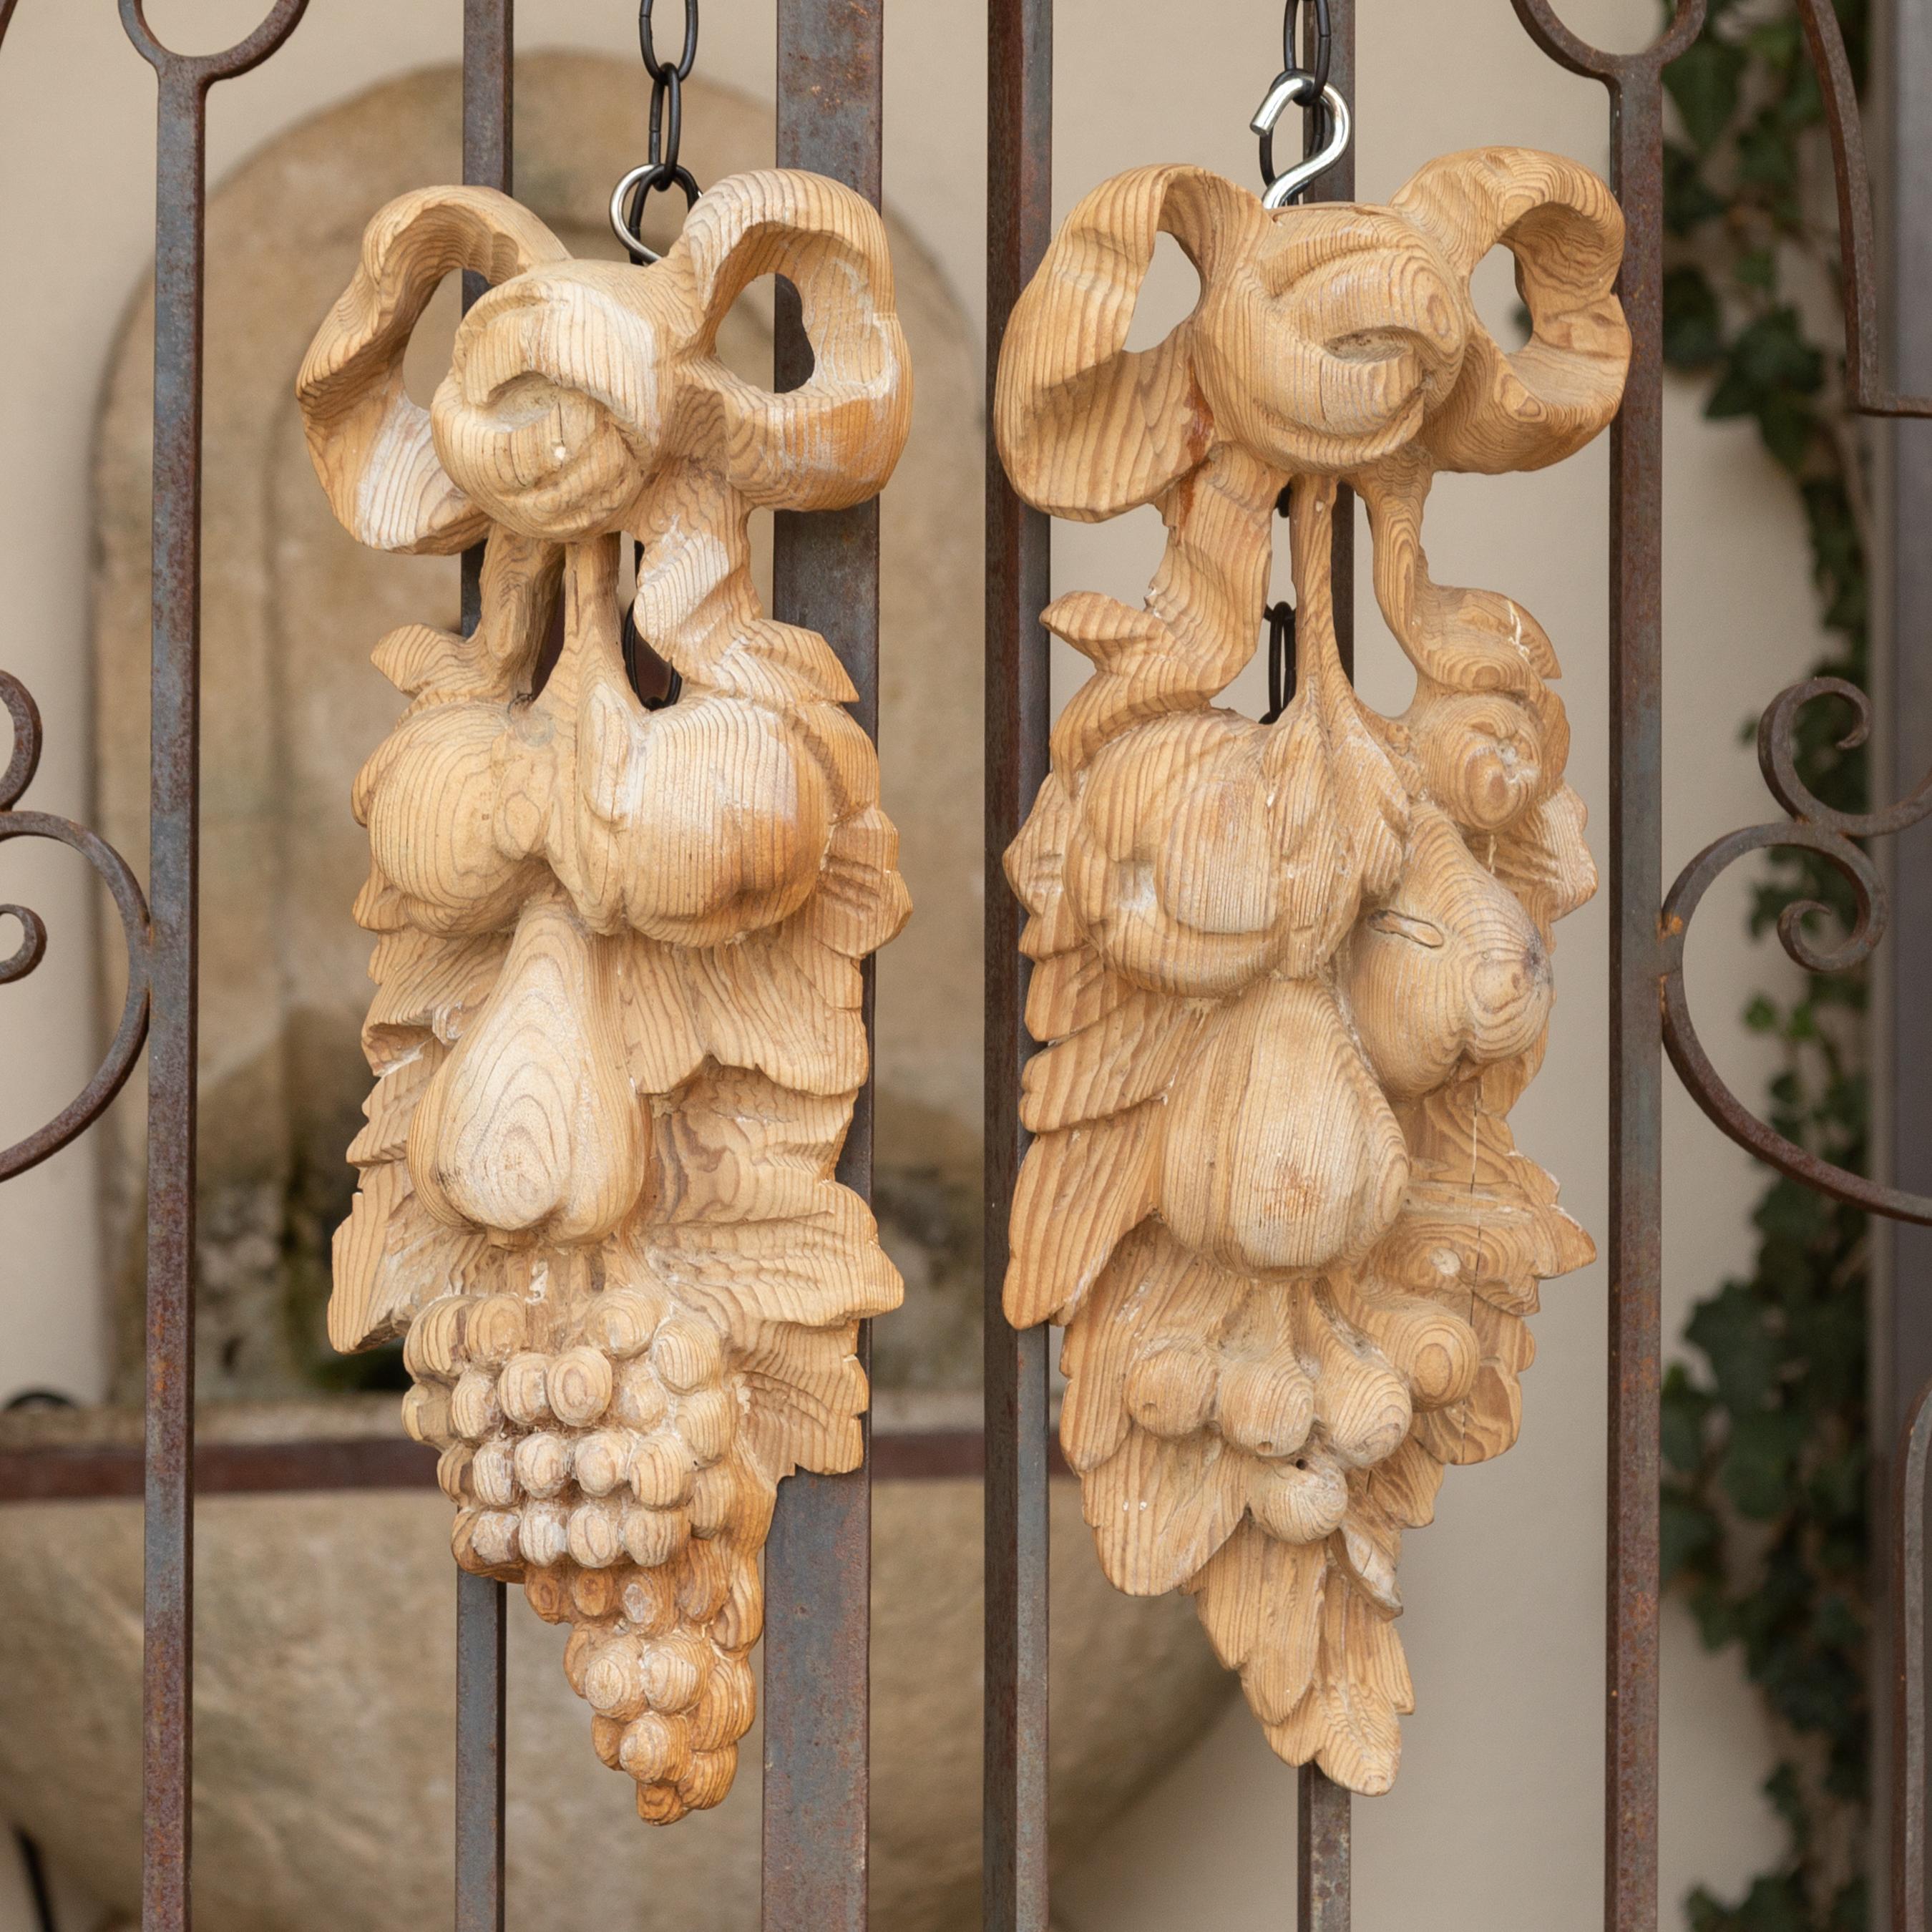 A pair of vintage Italian bleached wood wall carvings from the mid-20th century, depicting ribbon-tied fruits. Born in Italy during the midcentury period, each of this pair of wall carvings depicts a ribbon-tied arrangement of high-relief pears and